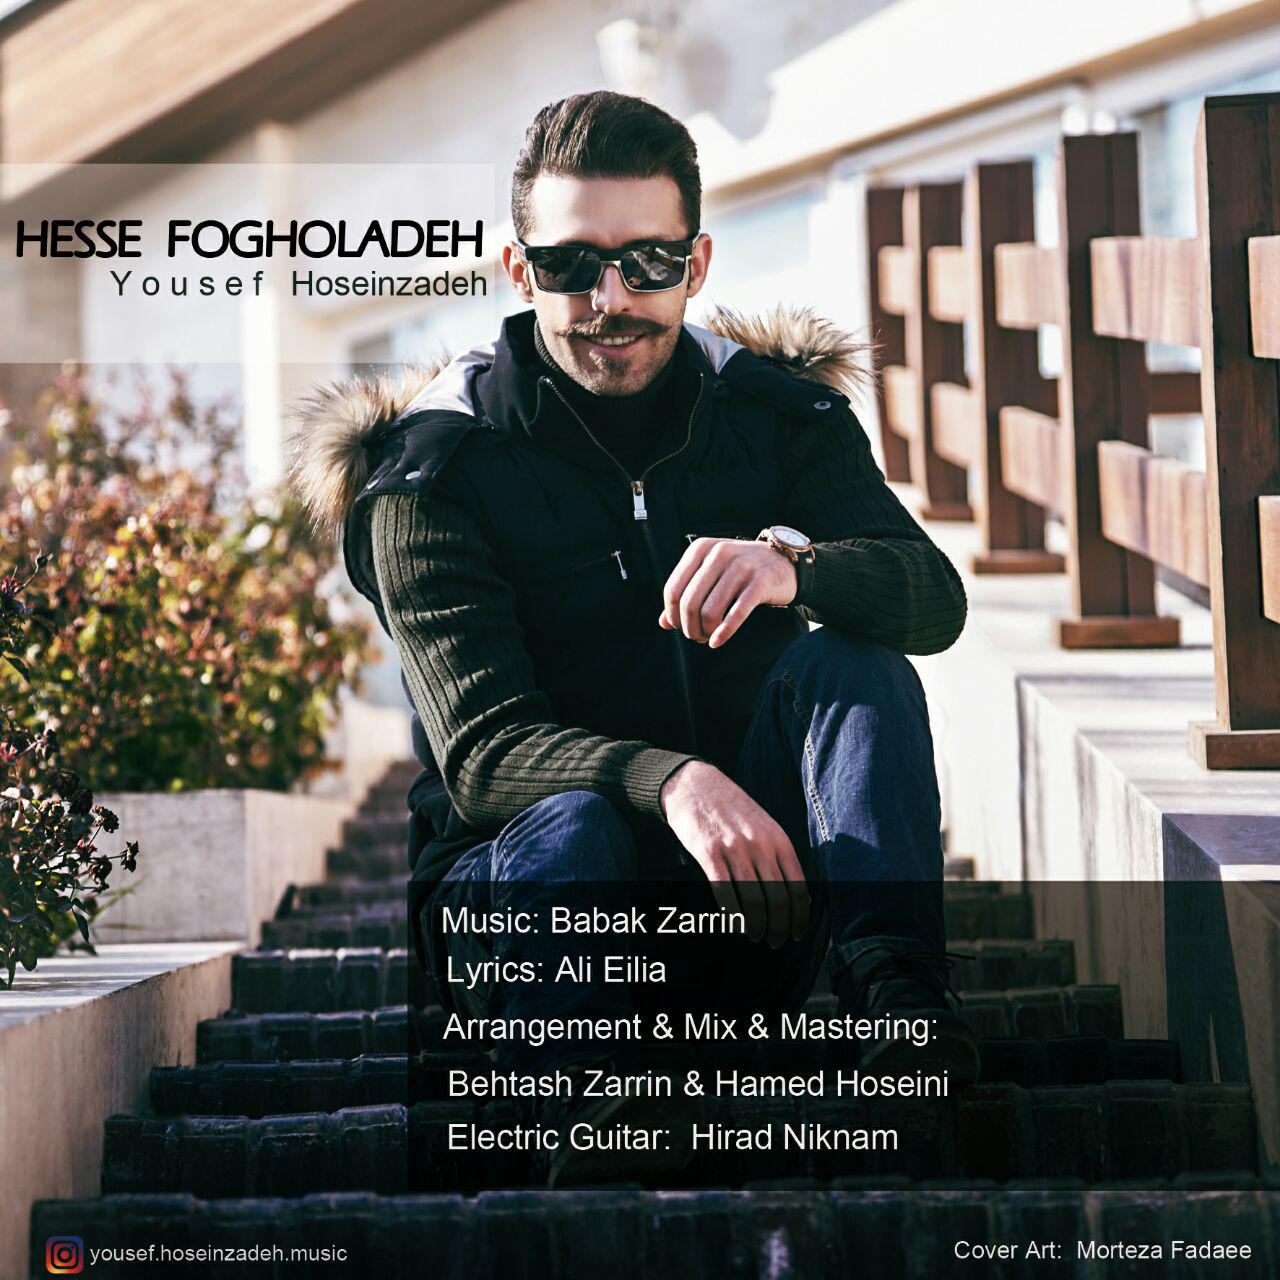 Yousef Hoseinzadeh – Hesse Fogholadeh